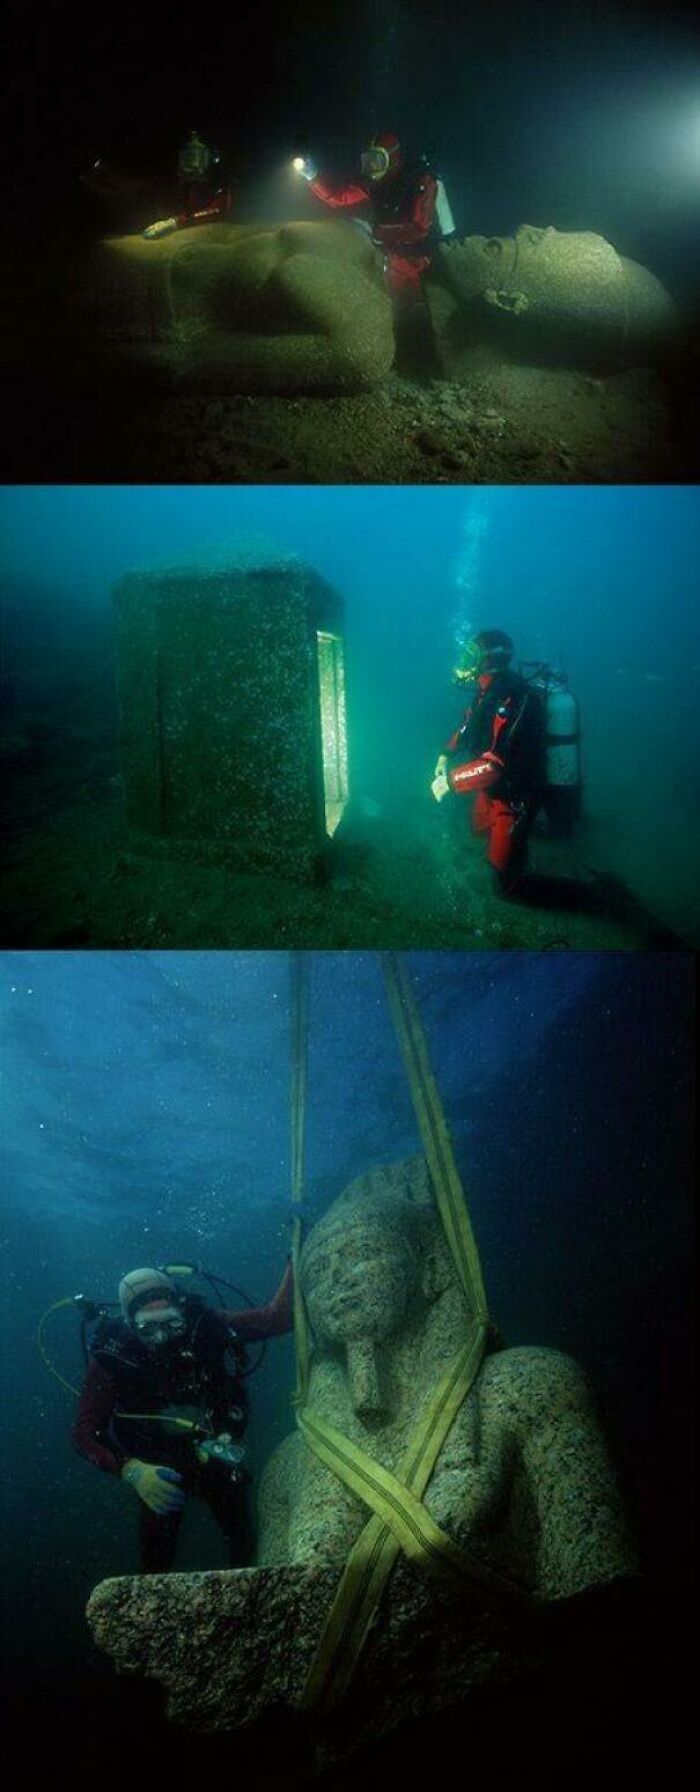 More photos of the recently discovered Egyptian wreck